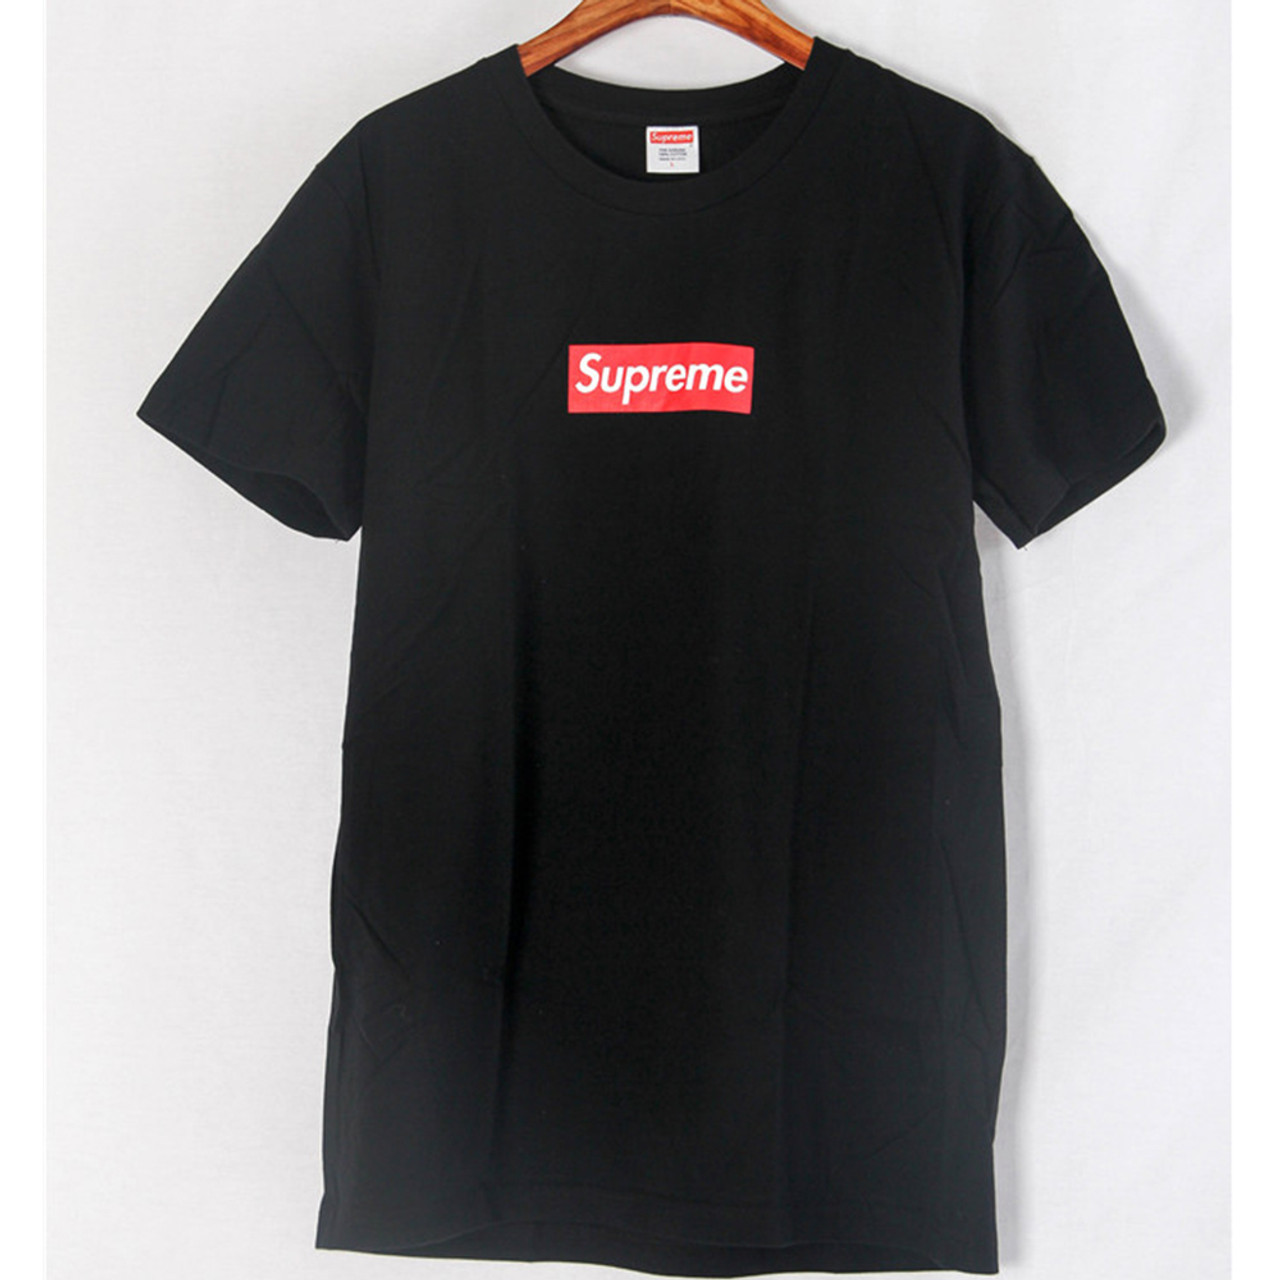 Unwrapping a #supreme #boxlogo tee - we got them in store for the